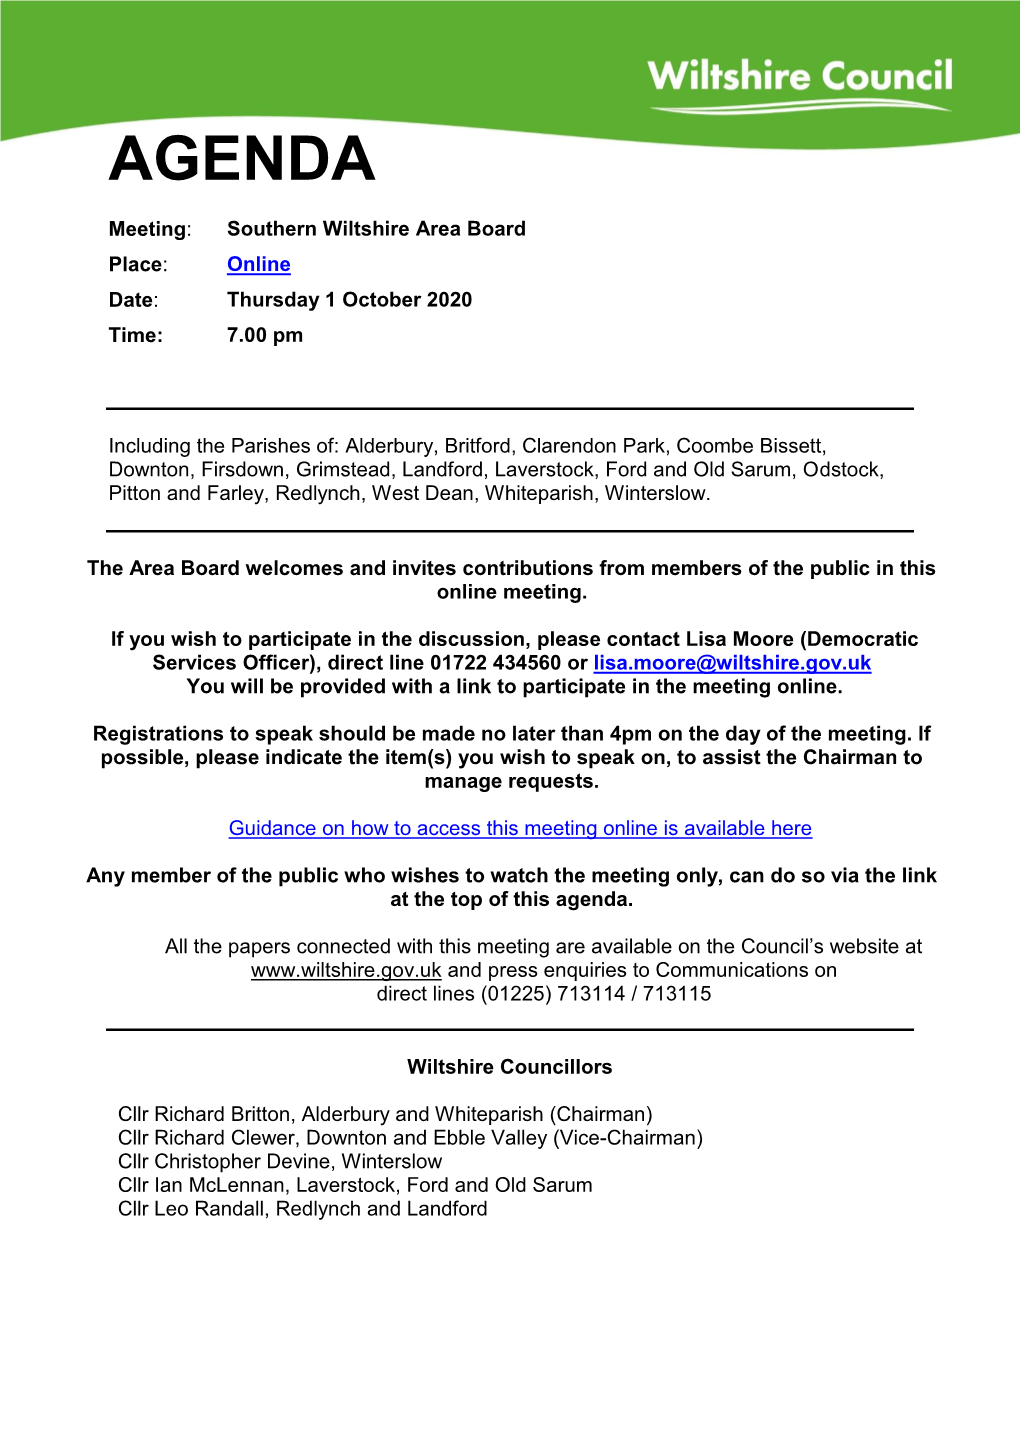 (Public Pack)Agenda Document for Southern Wiltshire Area Board, 01